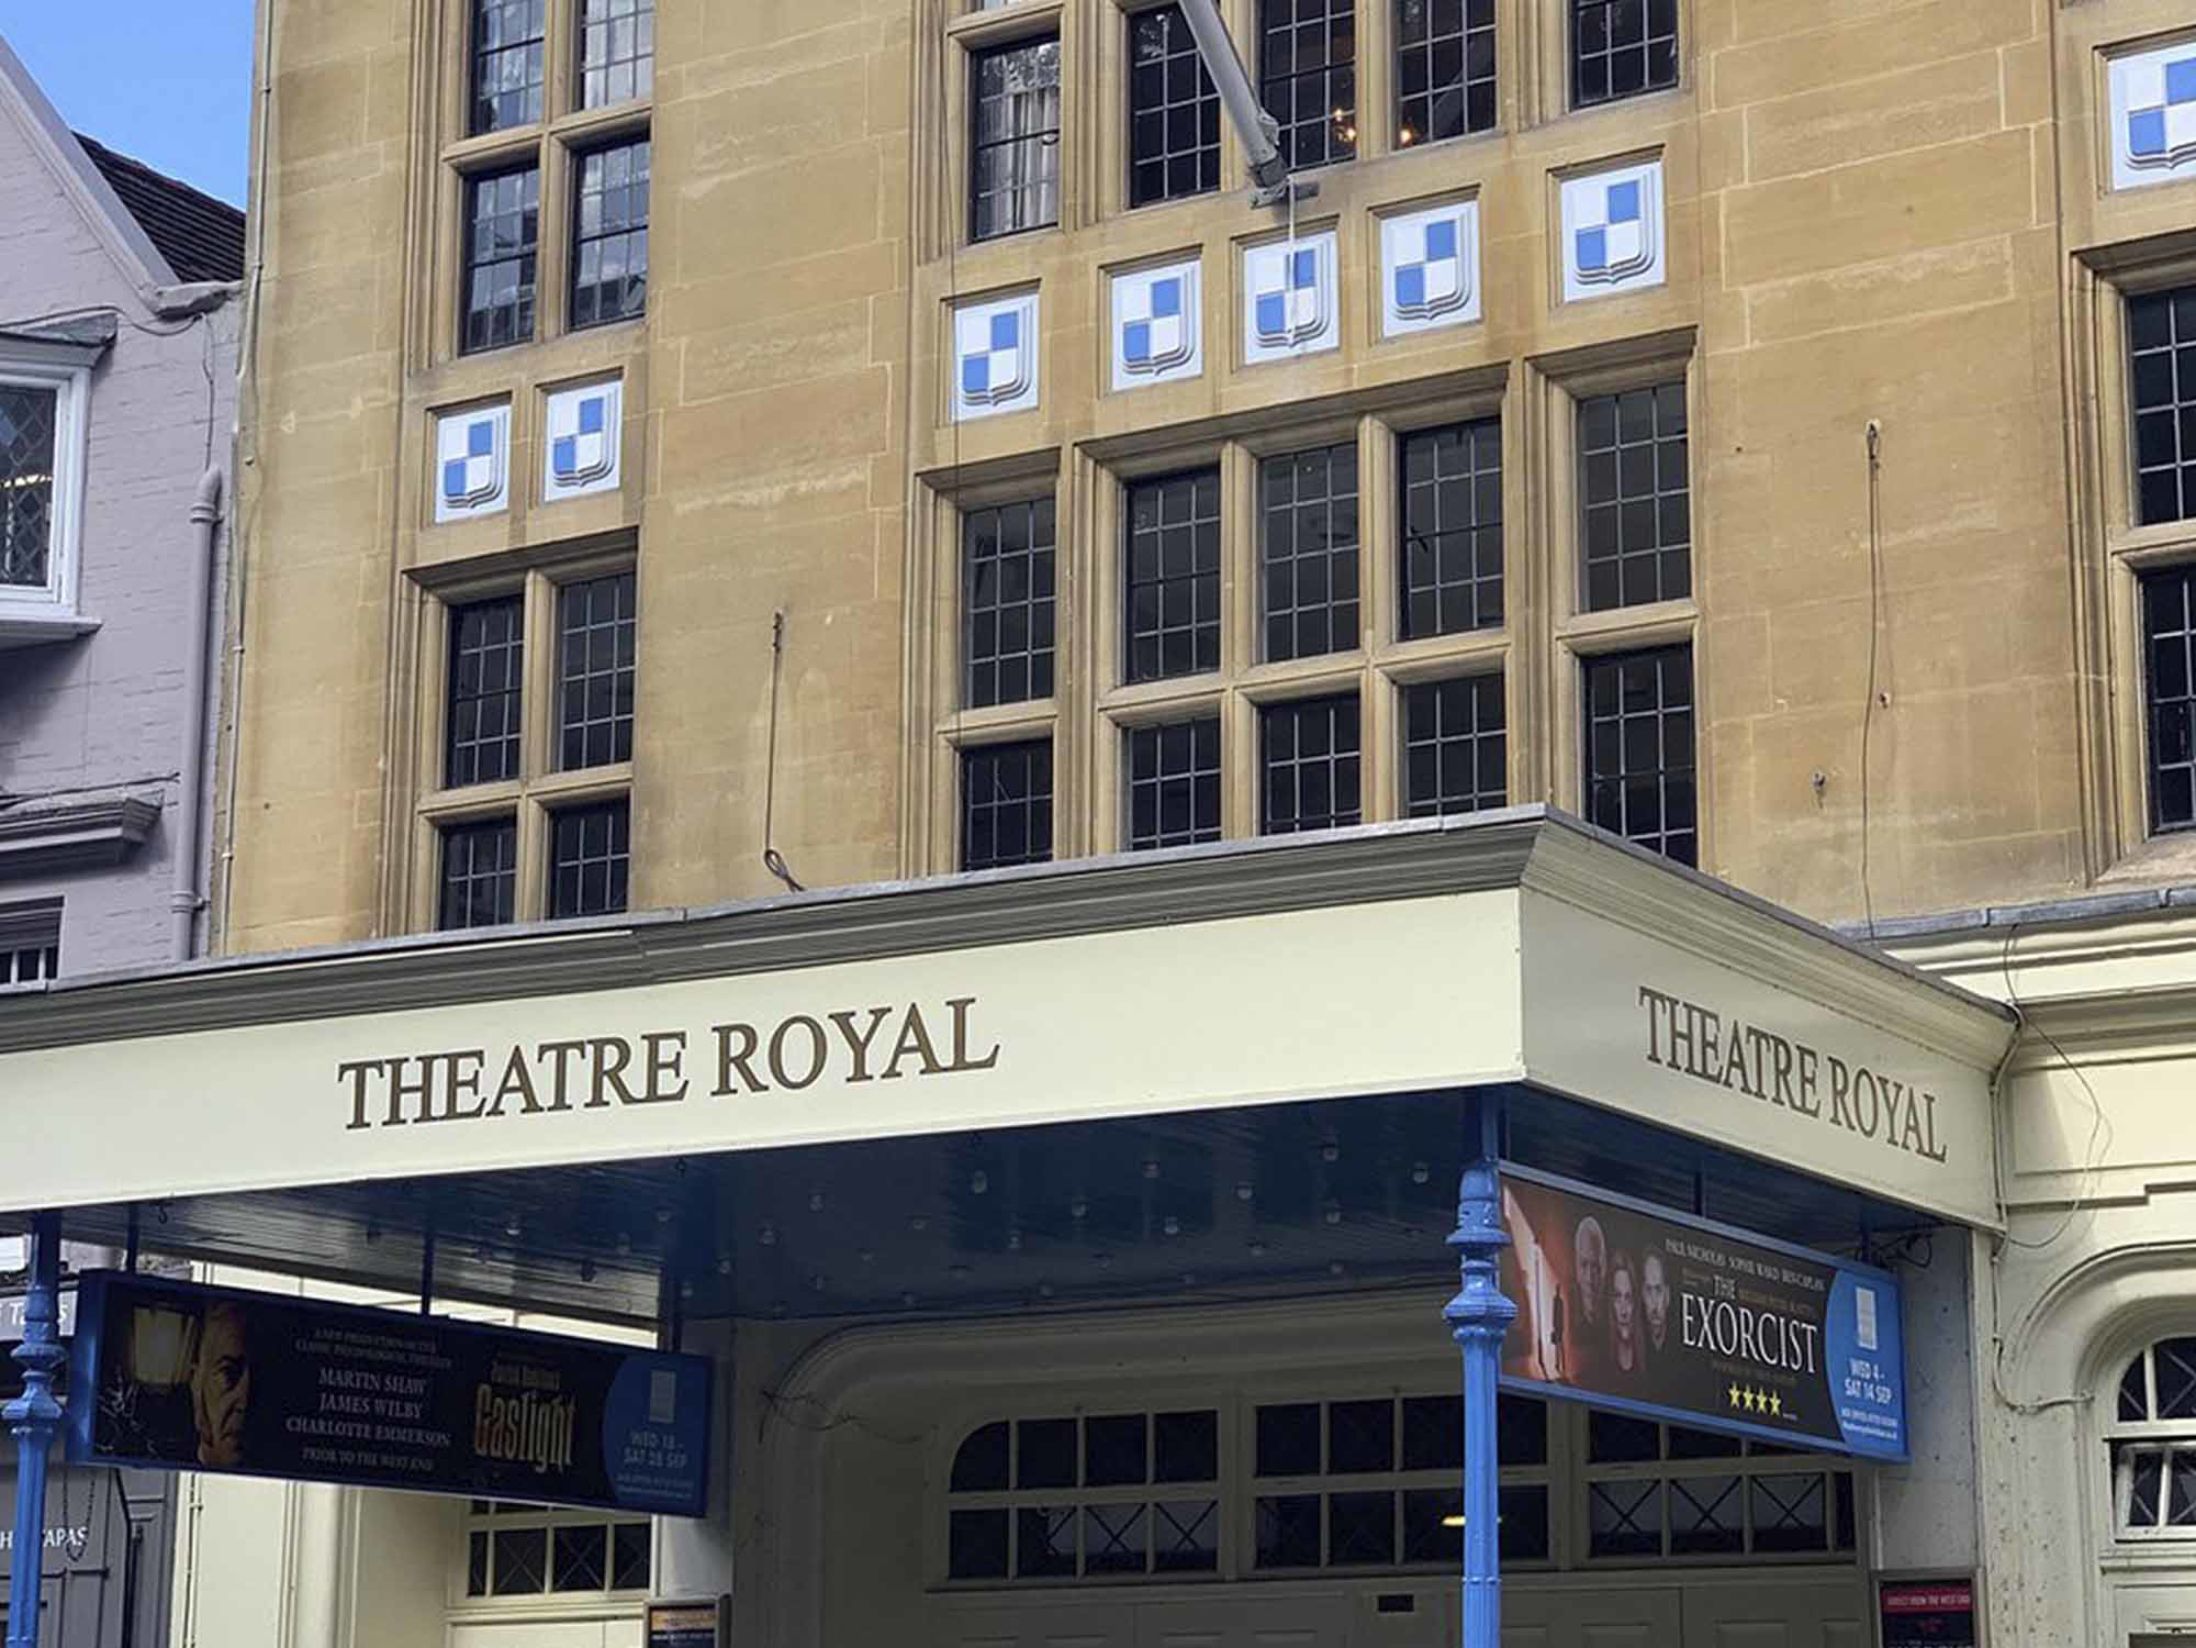 Things to do in Windsor - Theatre Royal